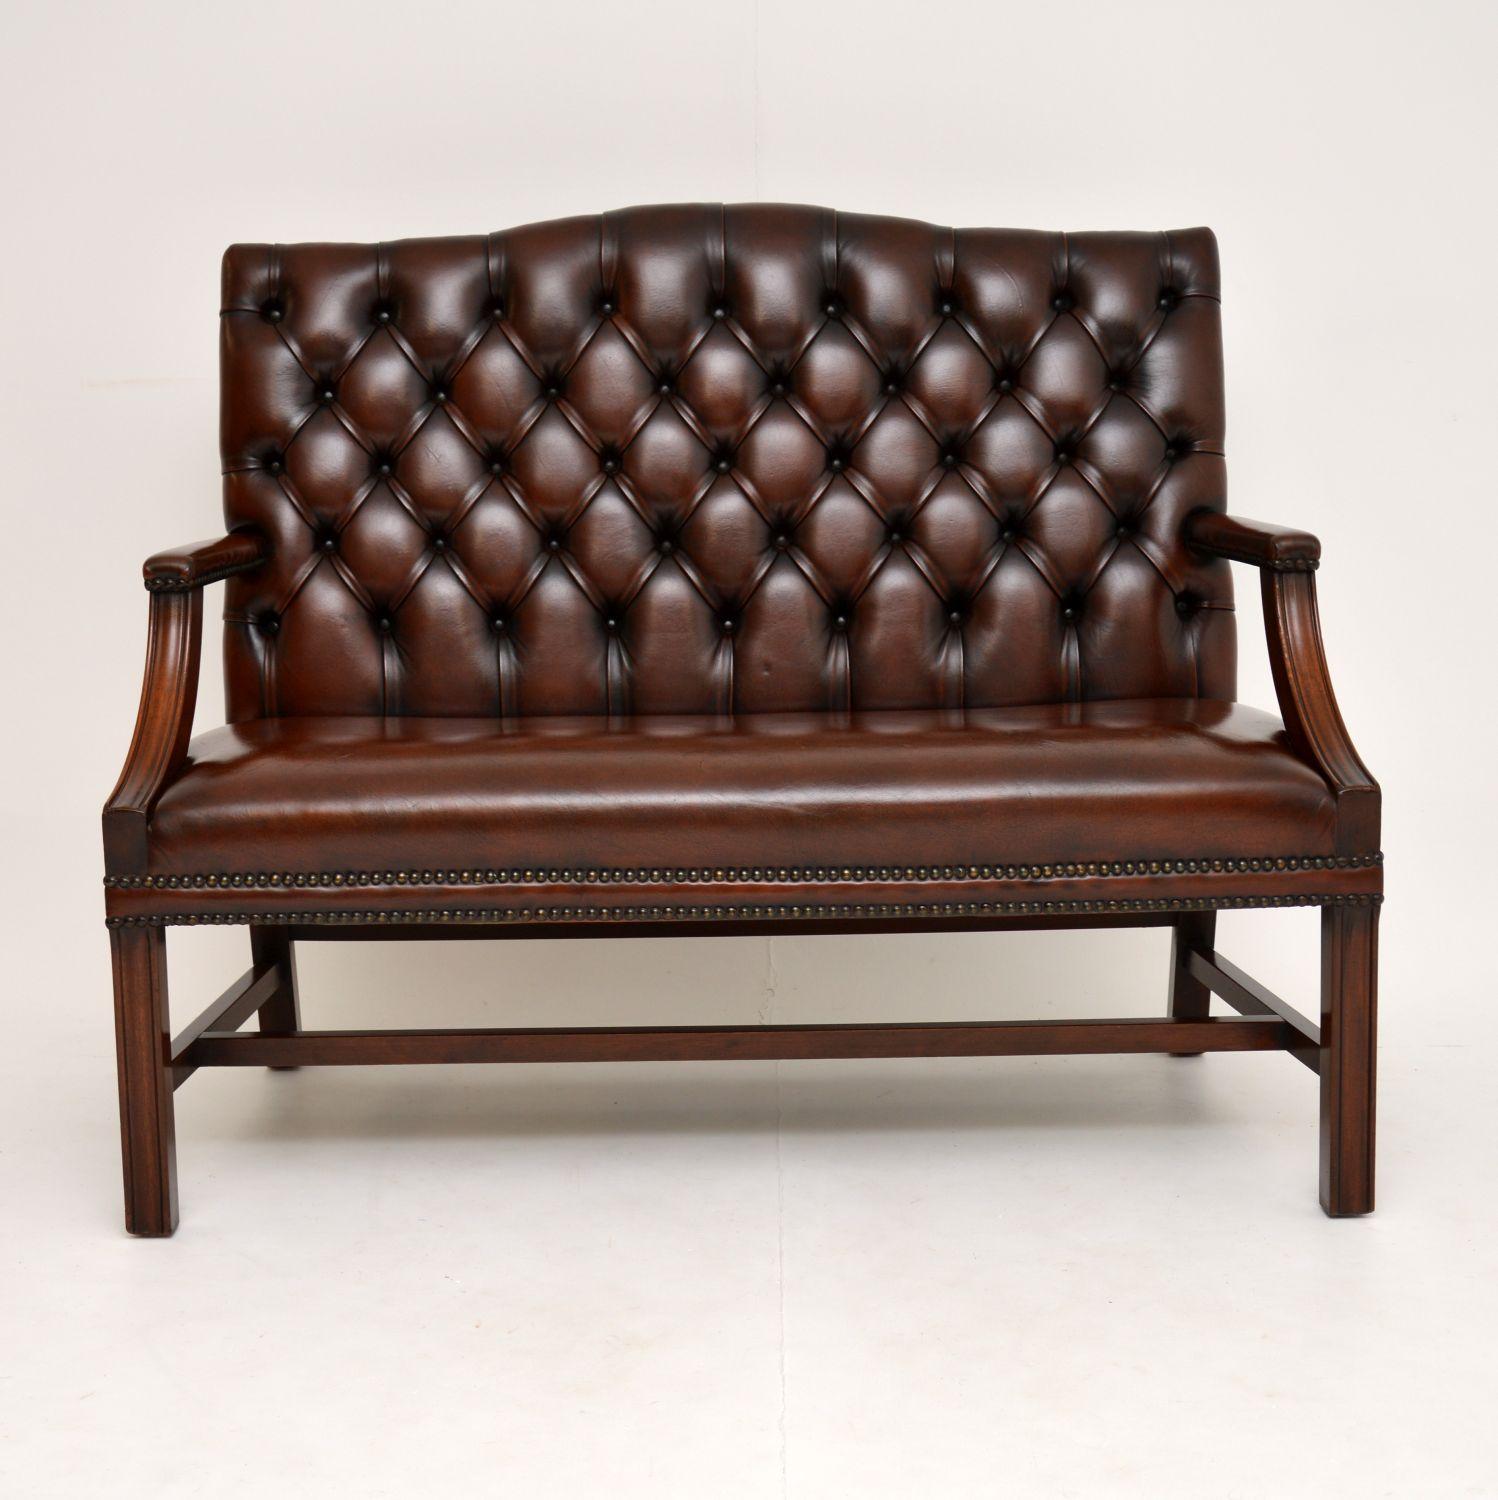 A smart and very well made antique Chippendale style settee, beautifully made from solid mahogany and leather. This dates from circa 1950s.

It’s of top quality and it is quite unusual to see this design as a sofa rather than armchairs. It is